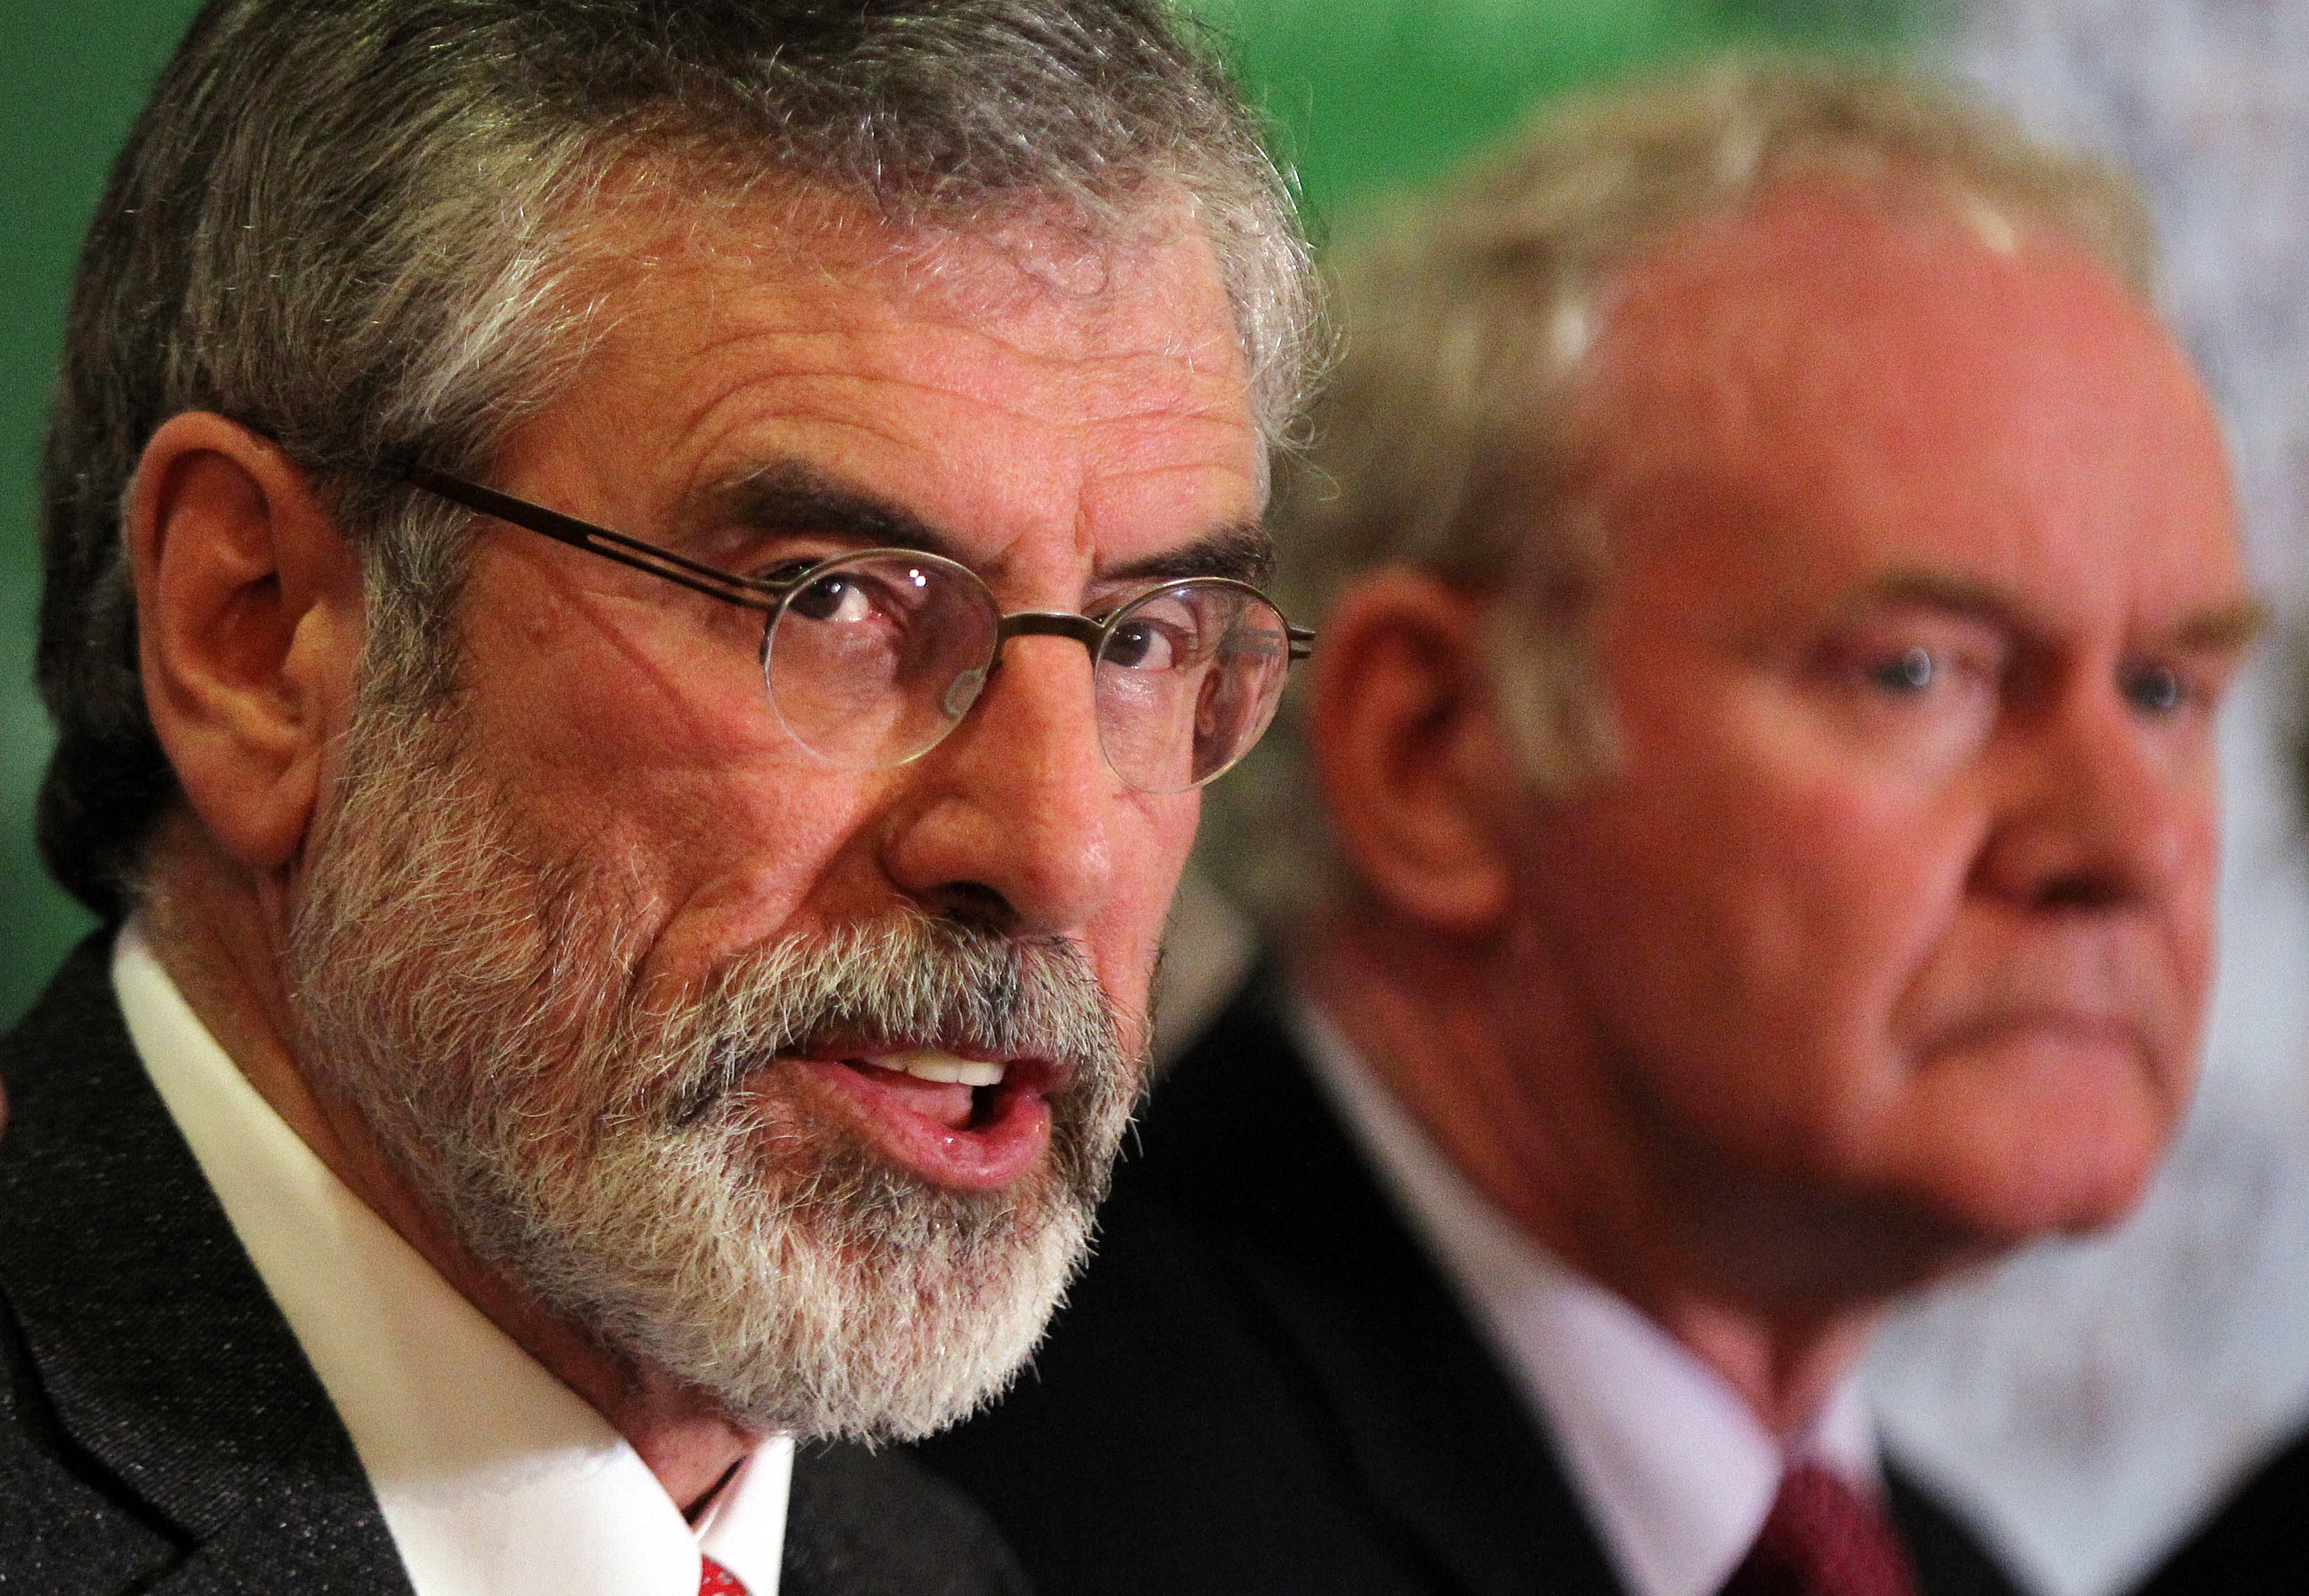 Republican party Sinn Fein leader Gerry Adams, left, next to Sinn Fein politician and Deputy First Minister of Northern Ireland Martin McGuinness,  talks to the media during a press conference at a hotel in Belfast, Northern Ireland, on May 4, 2014 following his release from Antrim police station where he was detained for questioning over a 1972 murder. (Peter Muhly—AFP/Getty Images)